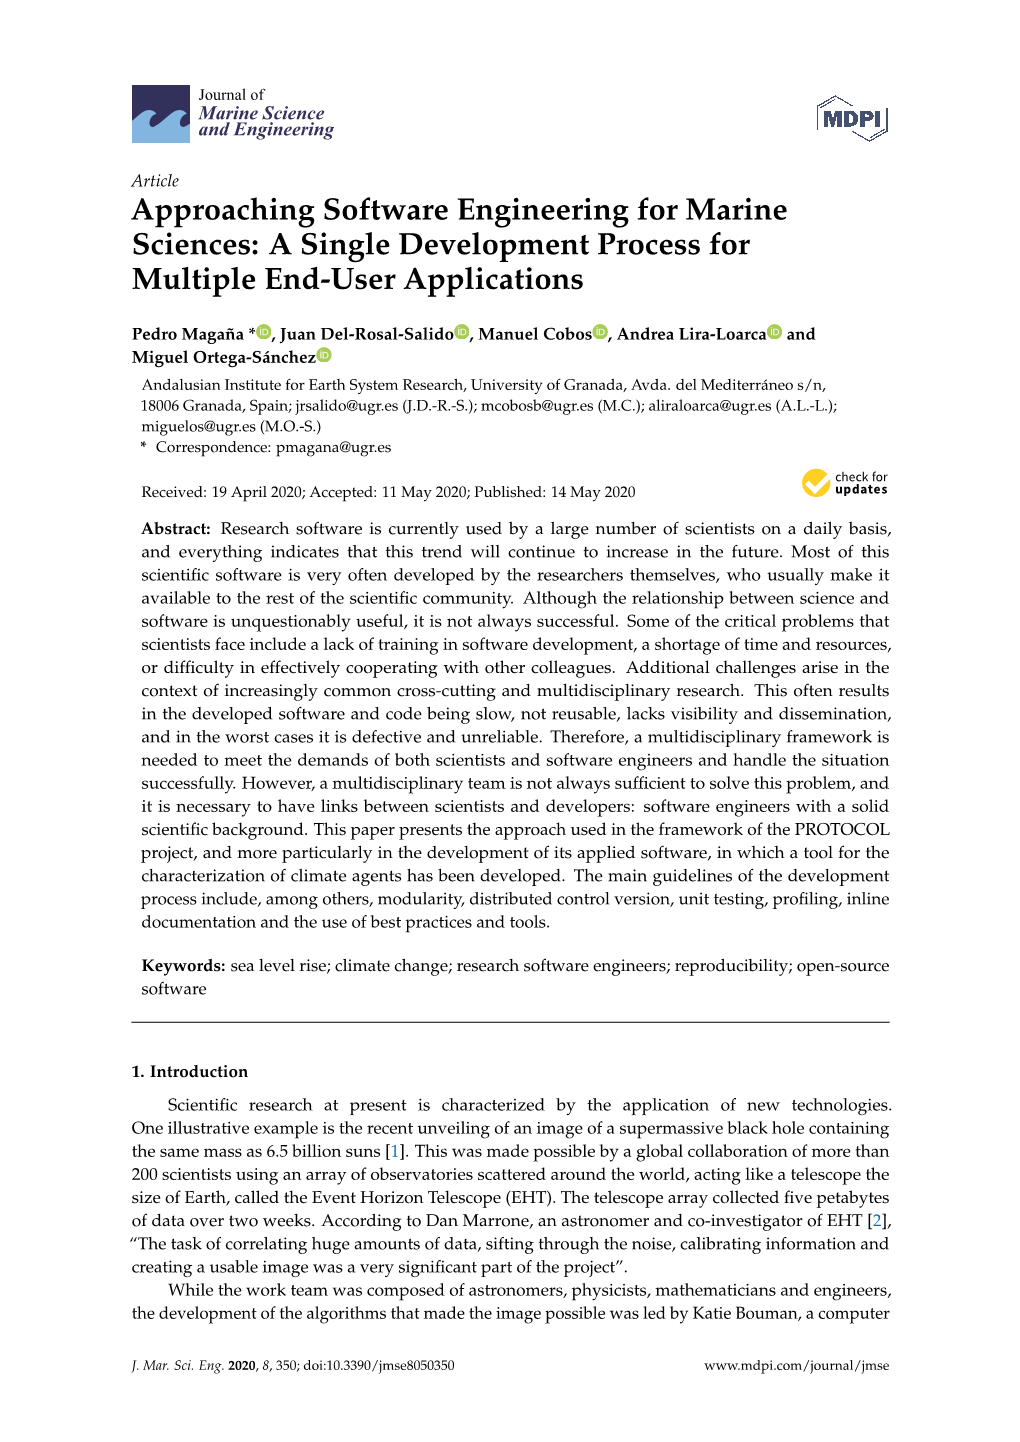 Approaching Software Engineering for Marine Sciences: a Single Development Process for Multiple End-User Applications